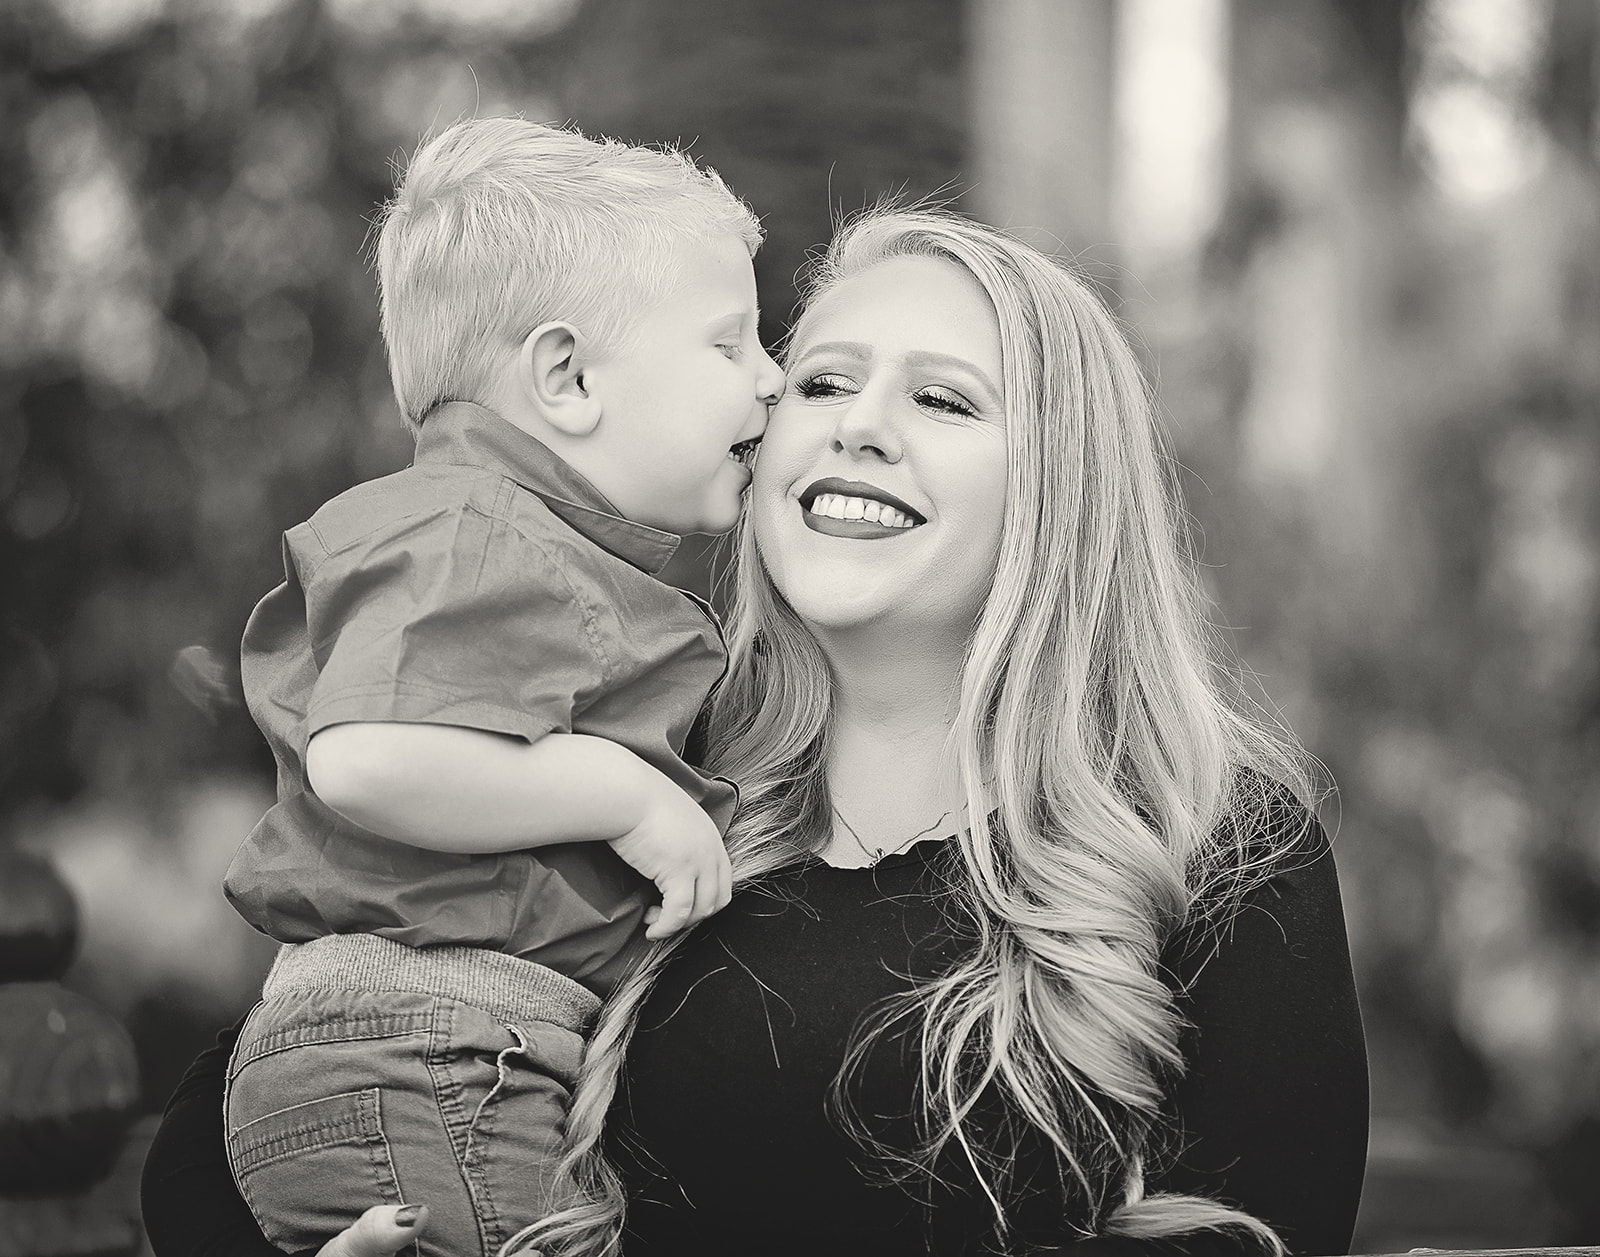 Family Session Photographer - Lia's Photography